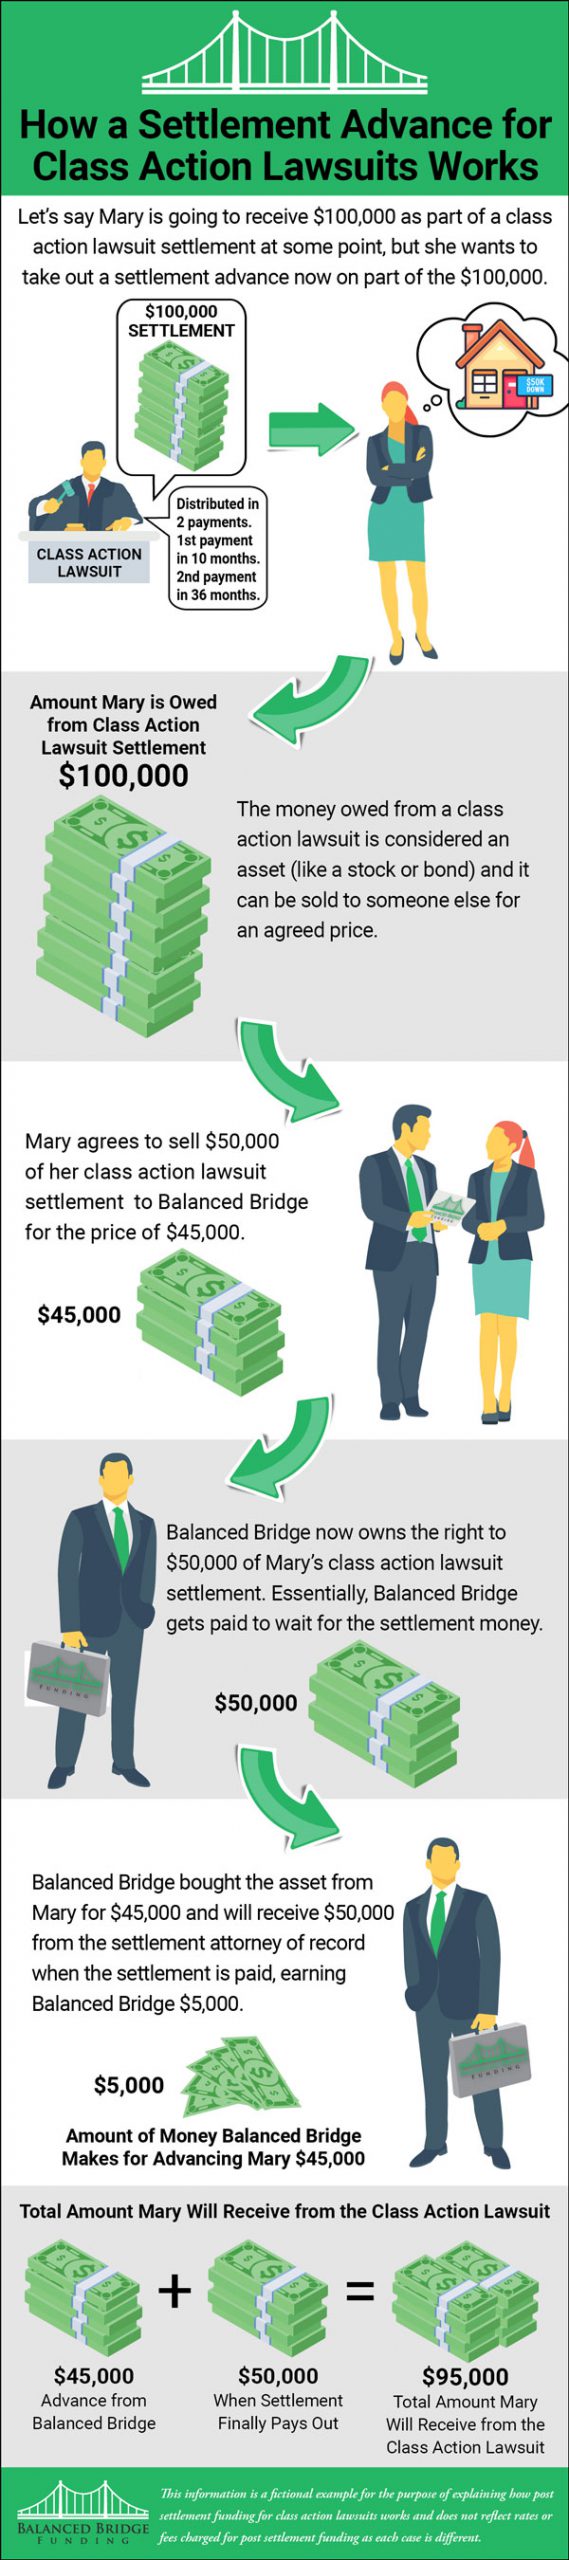 Infographic describing how settlement advance of class action lawsuits works